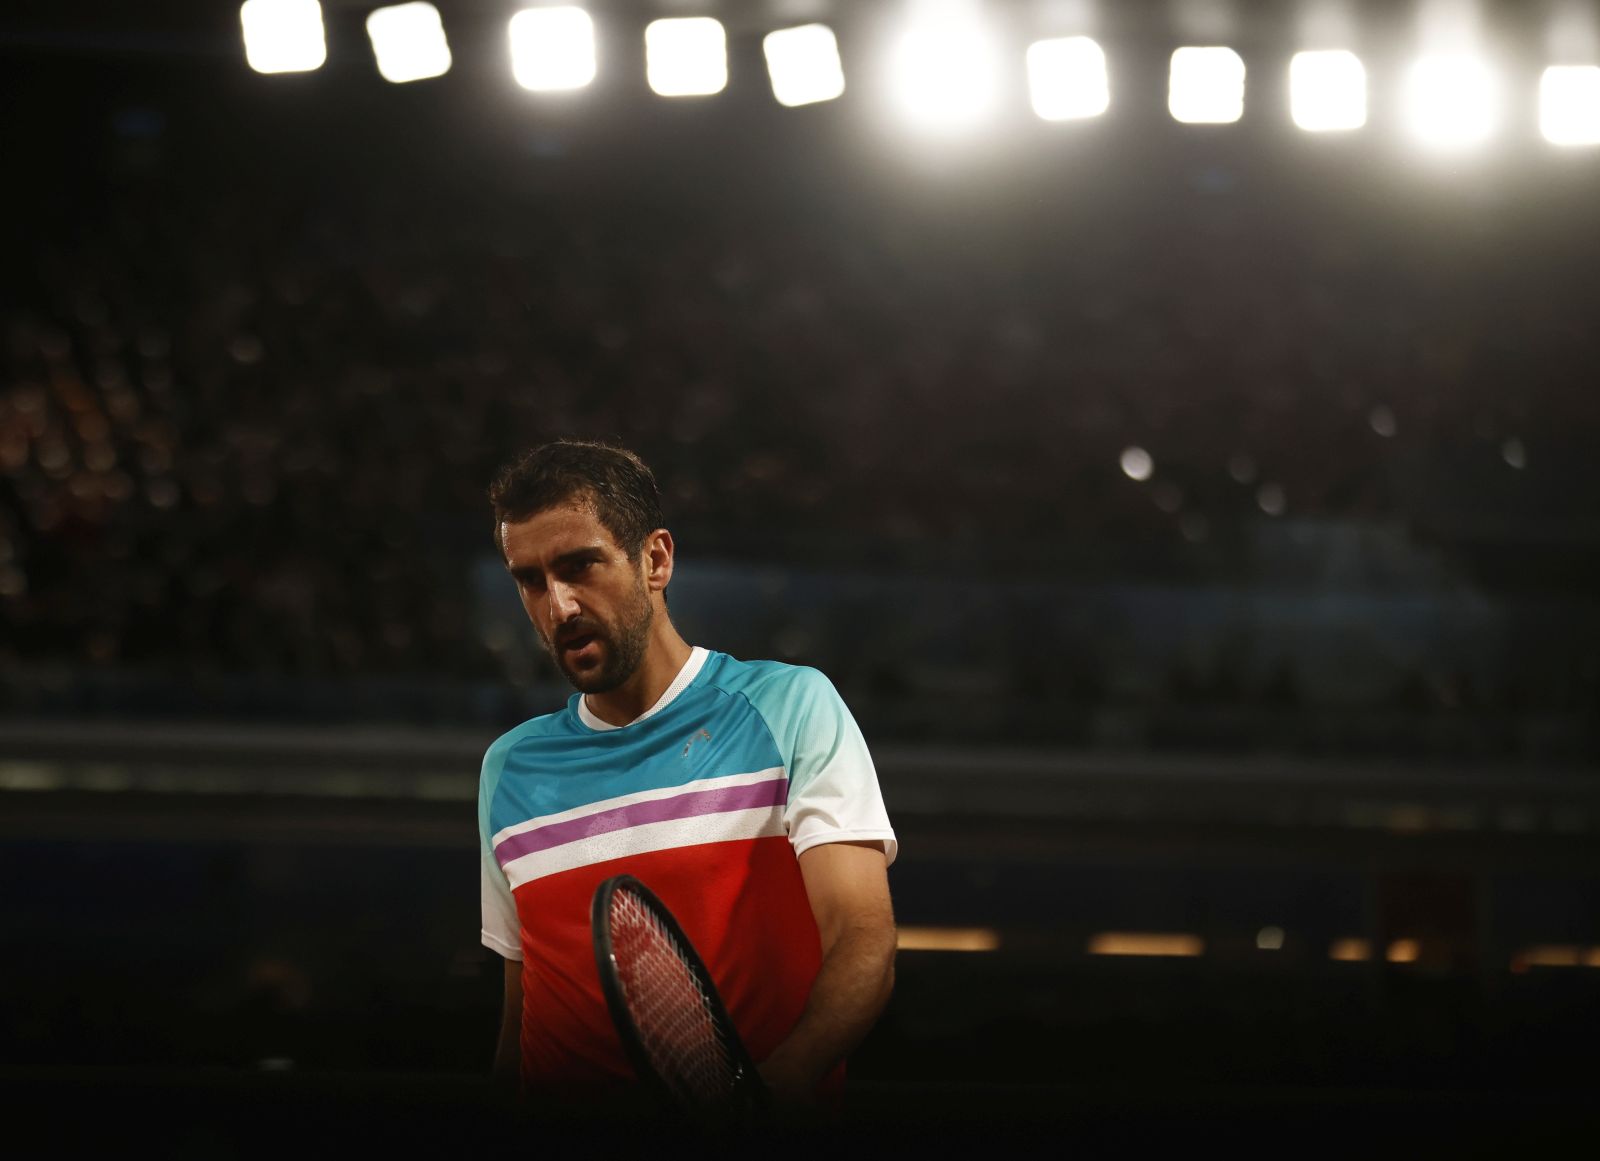 epa09986976 Marin Cilic of Croatia reacts during his match against Daniil Medvedev of Russia in their men’s fourth round match during the French Open tennis tournament at Roland Garros in Paris, France, 30 May 2022.  EPA/YOAN VALAT